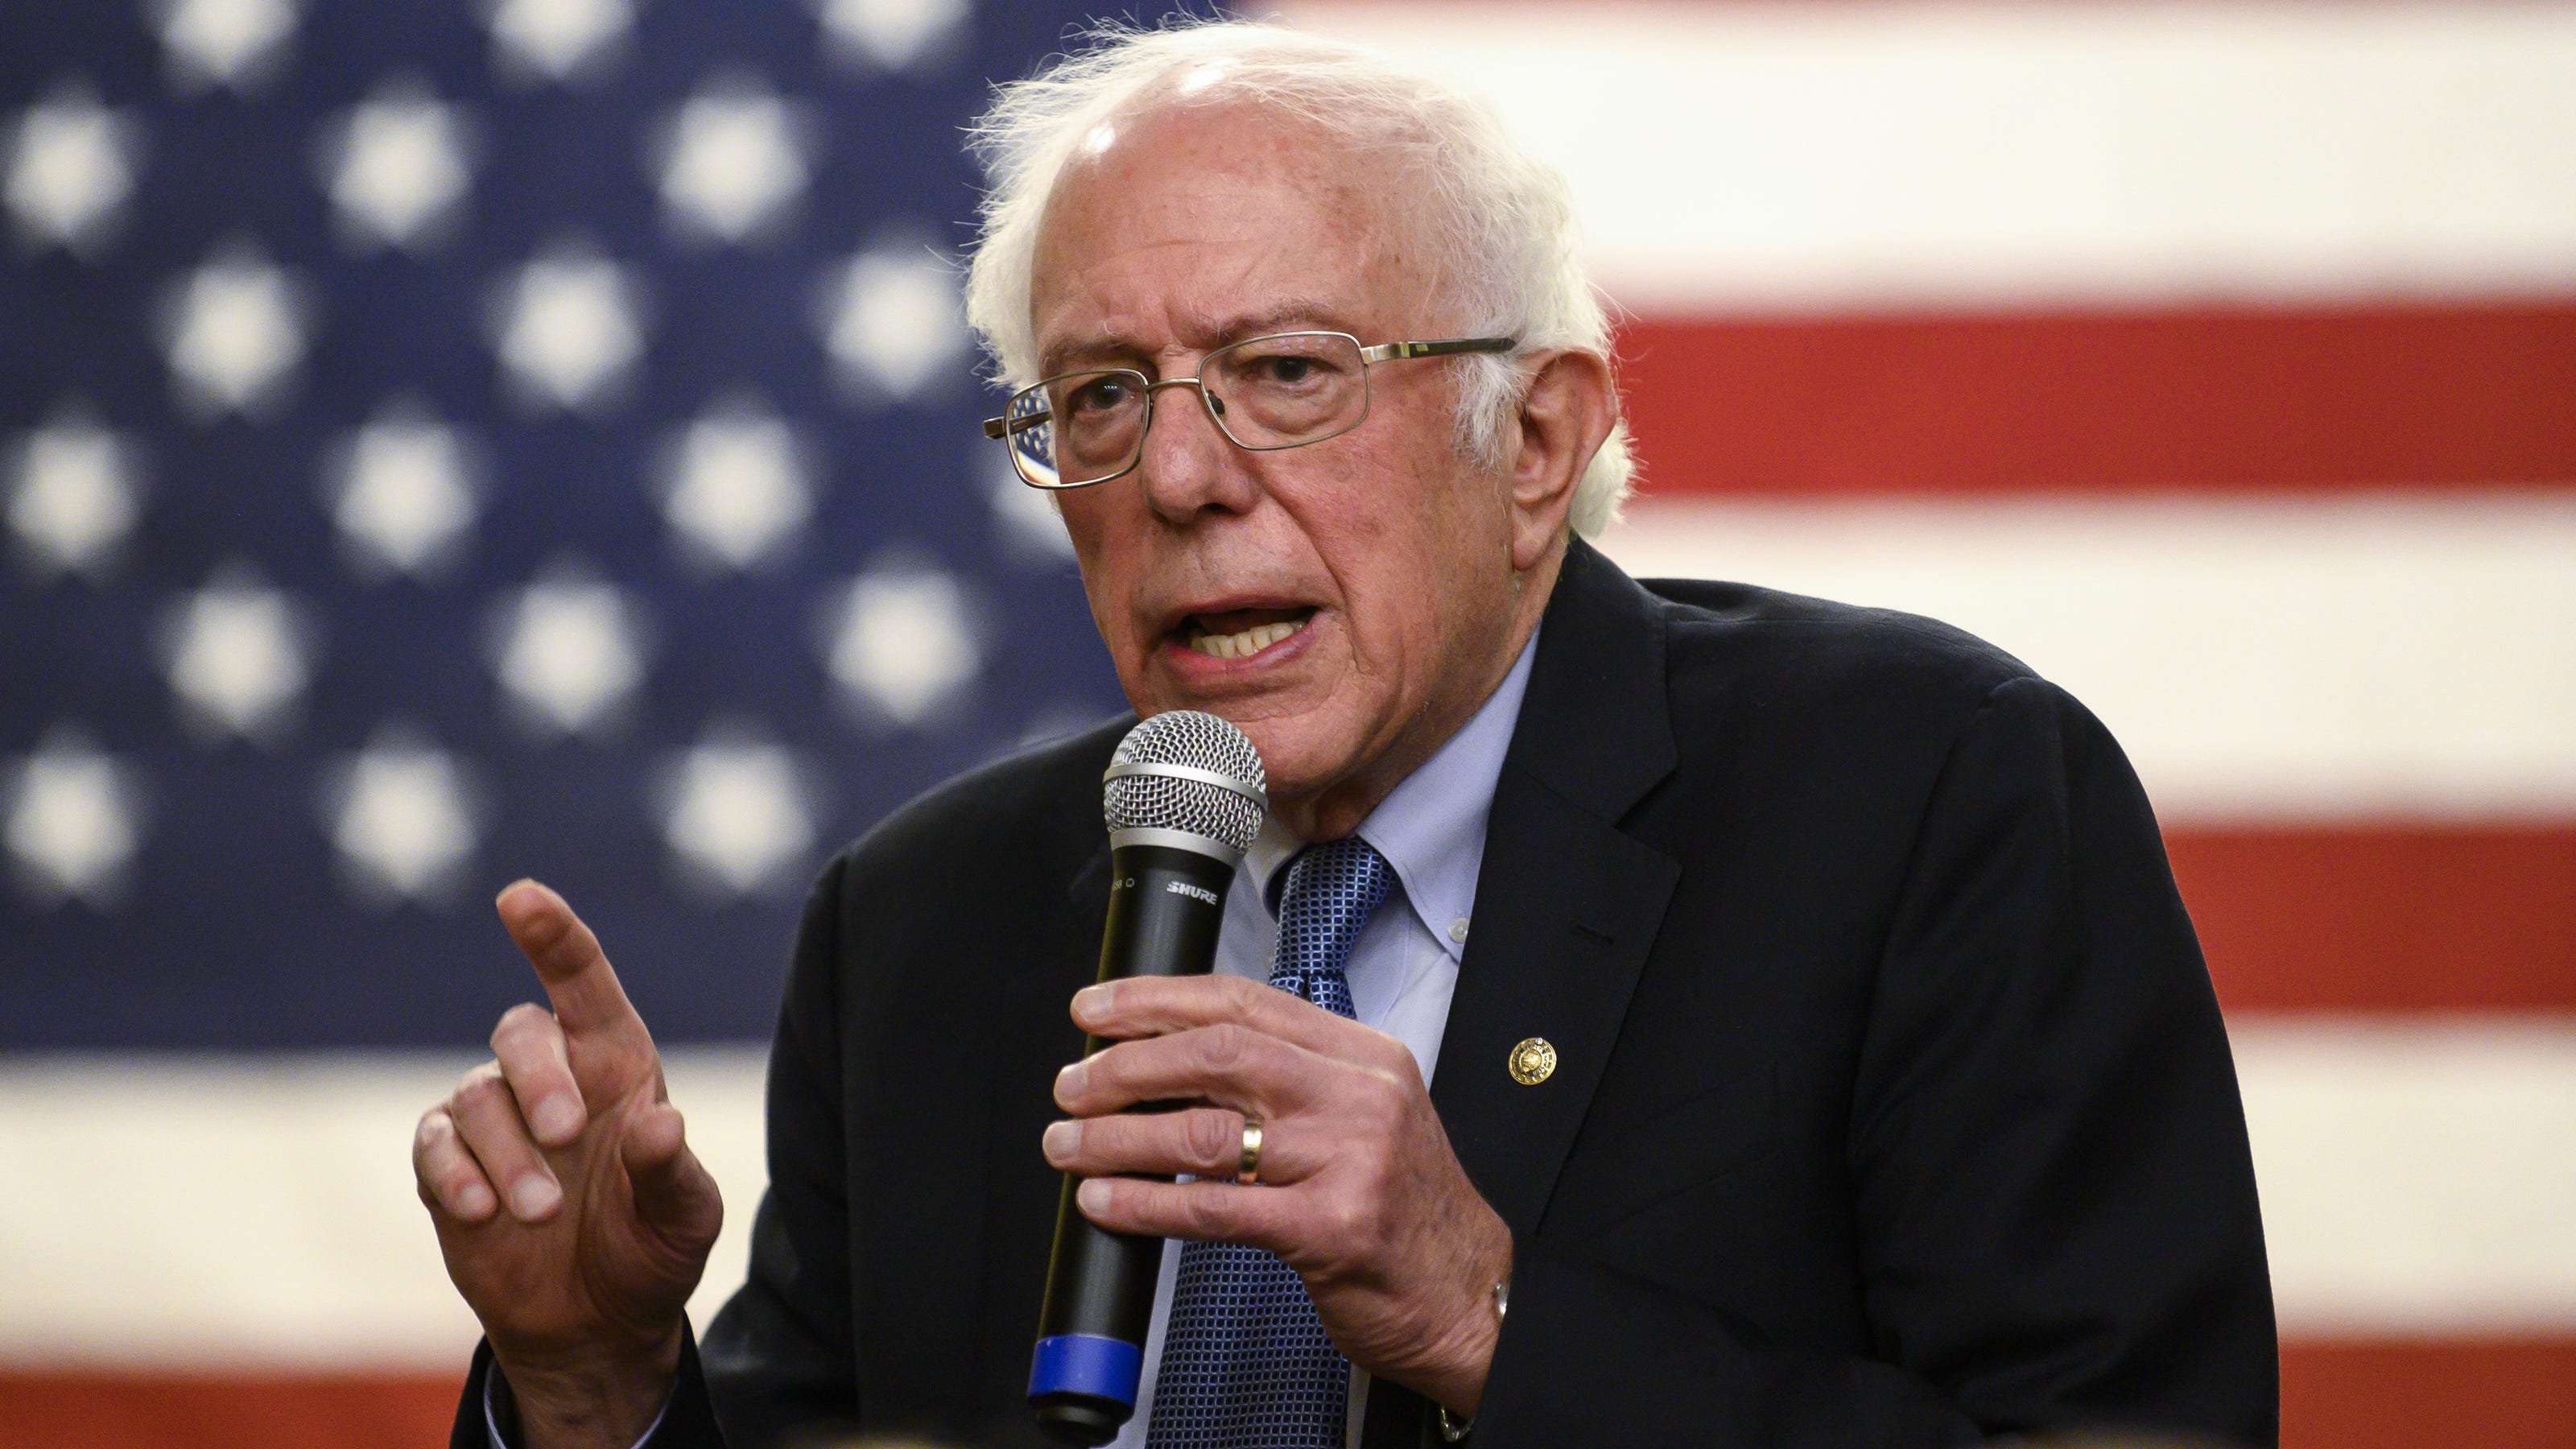 image for Bernie Sanders: Standardized tests have failed America's students